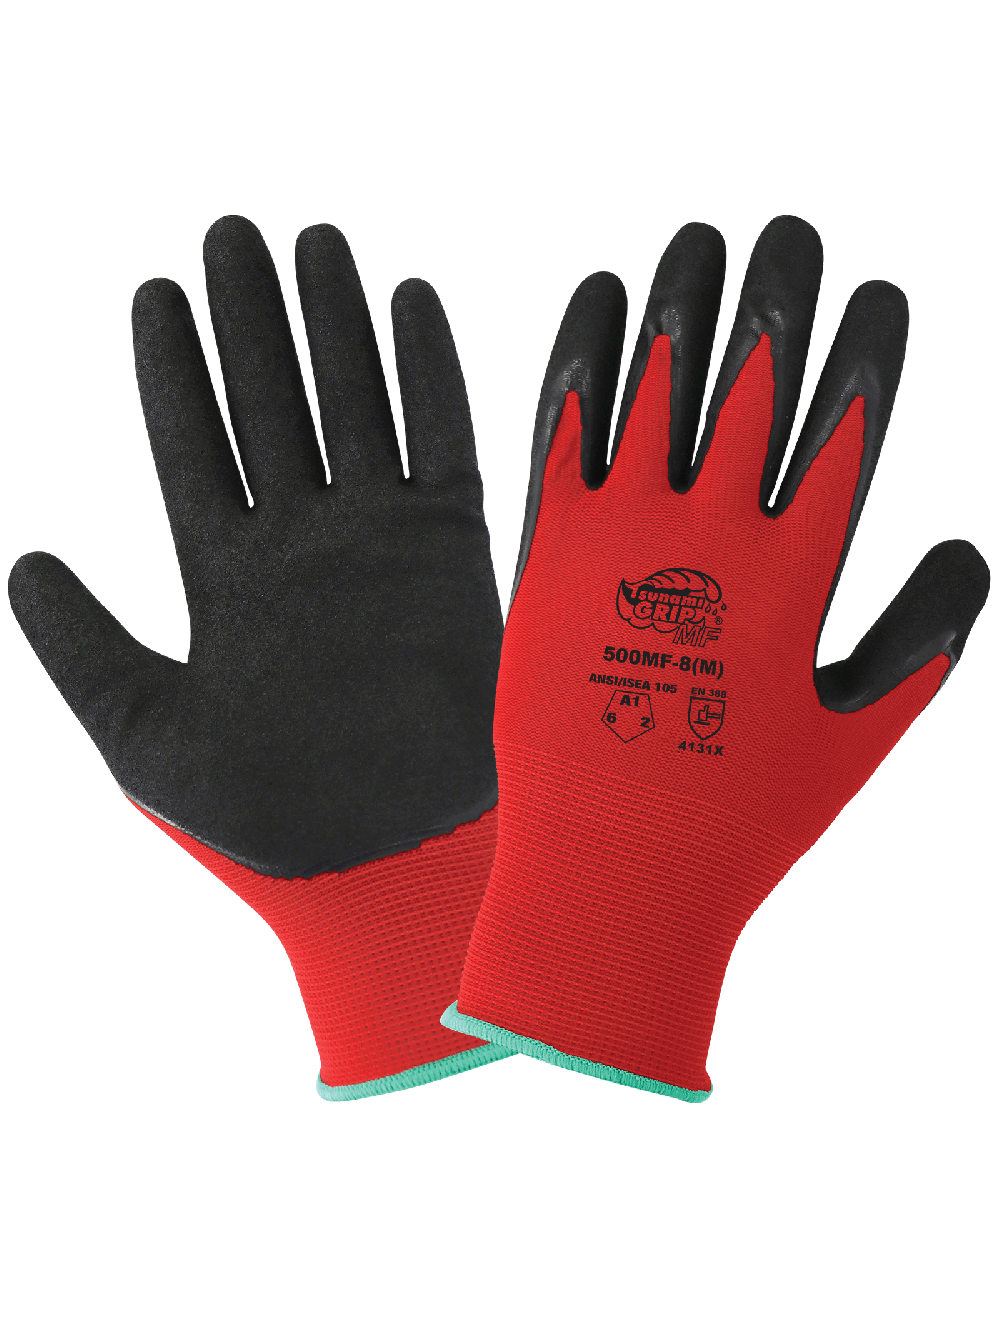 Global Glove and Safety Hand Protection, Eye Protection, Cooling  Protection, Heat Stress, Cut Resistant Protection Tsunami Grip® MF  Double-Dipped Mach Finish Nitrile Coated Gloves with Cut, Abrasion, and  Puncture Resistance - 500MF